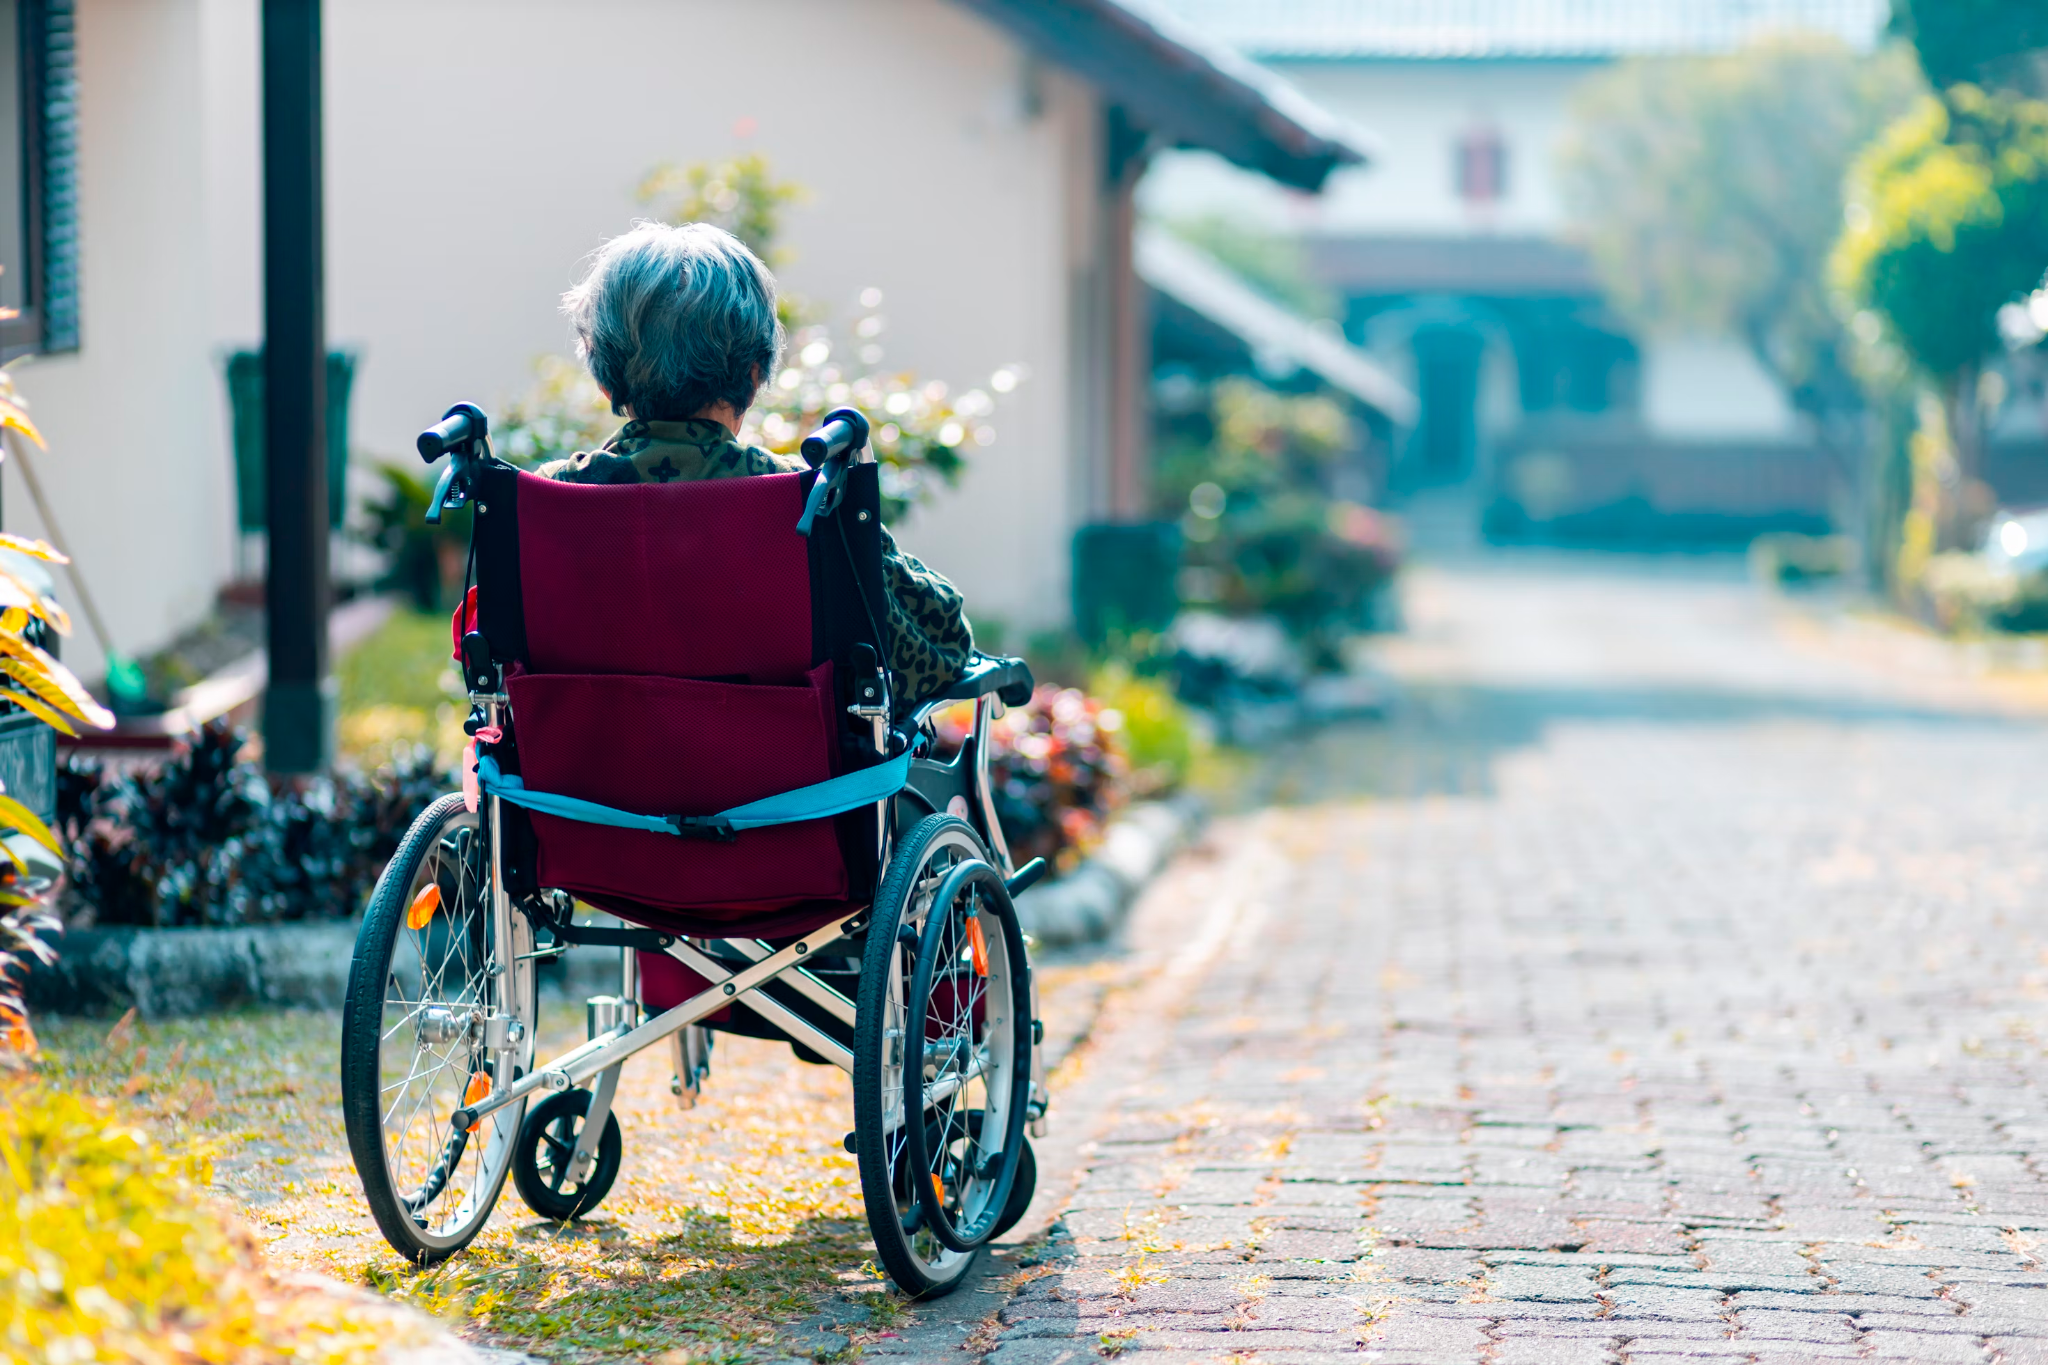 Factors That Cause Injuries To Dementia Patients In Nursing Homes